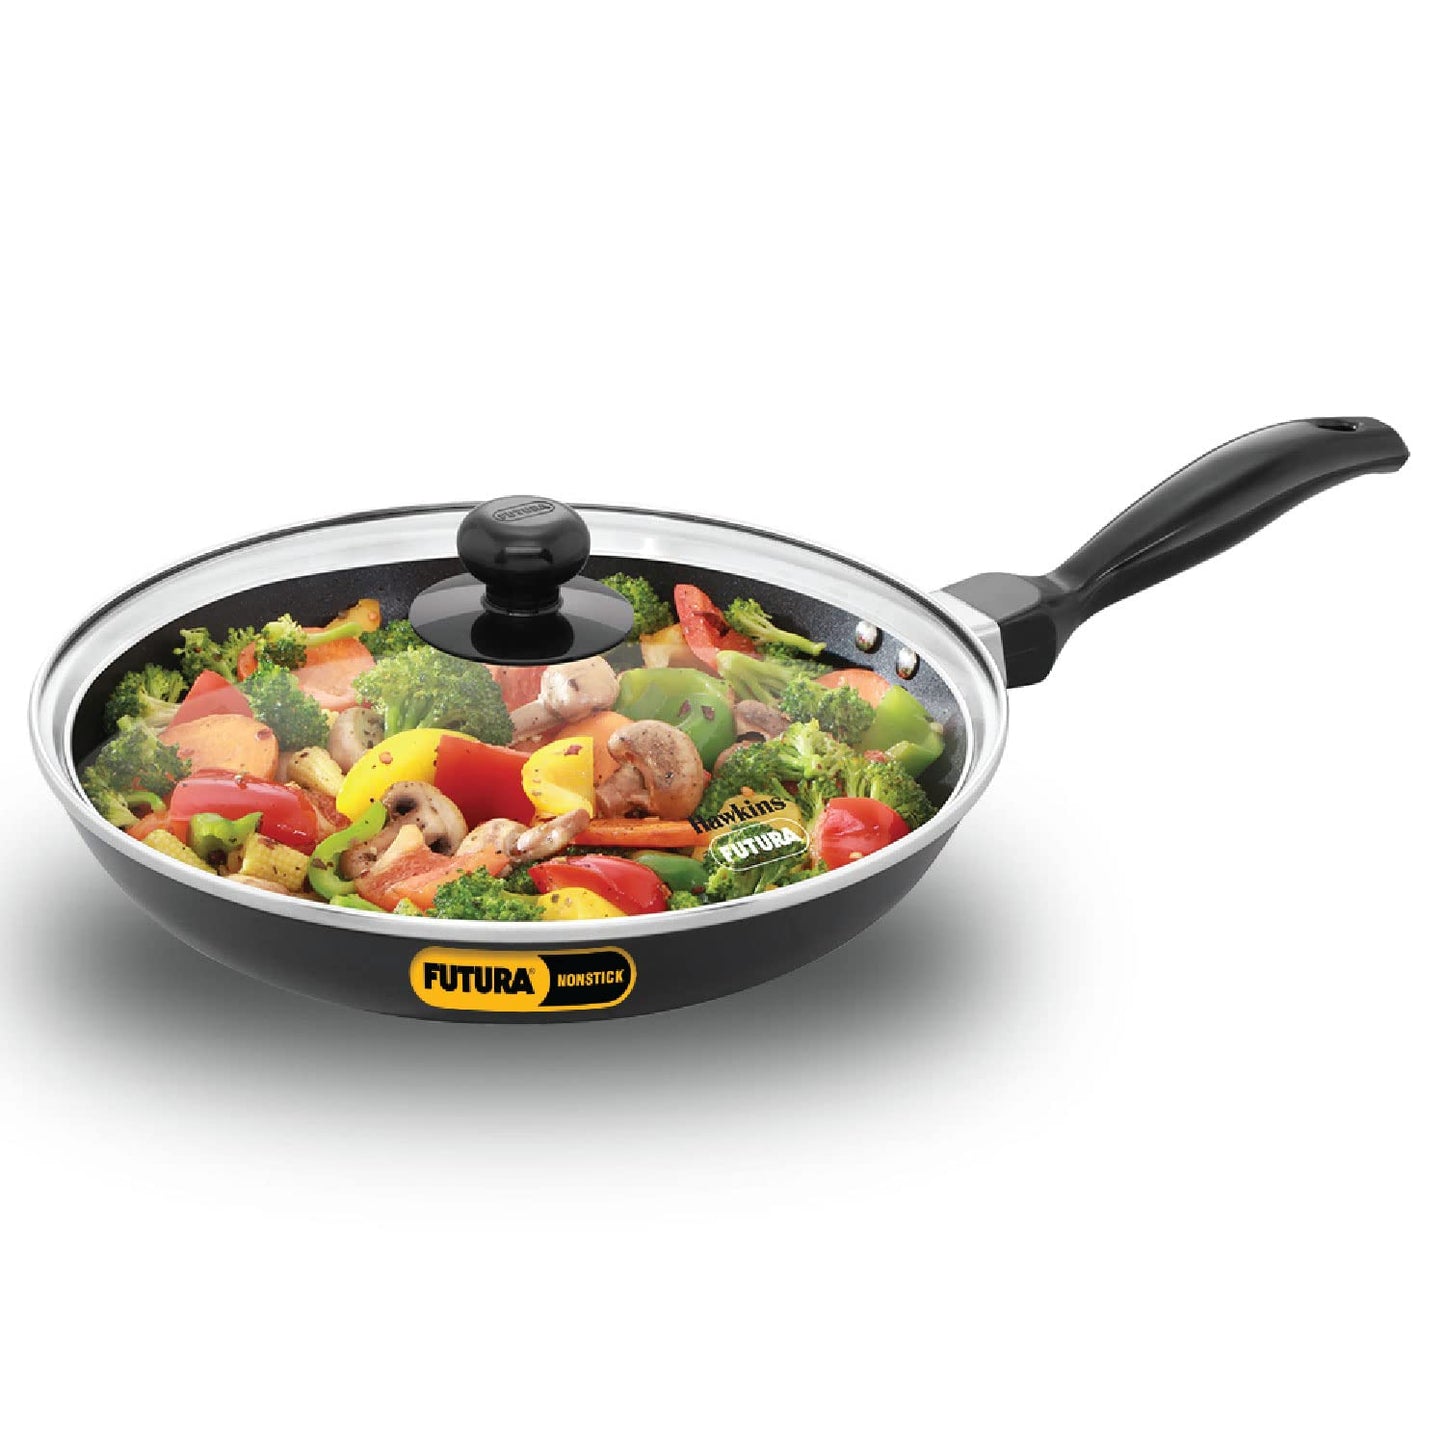 Hawkins Futura Non-stick Fry Pan 26 cms, 3.25mm Induction Base - INF 26G